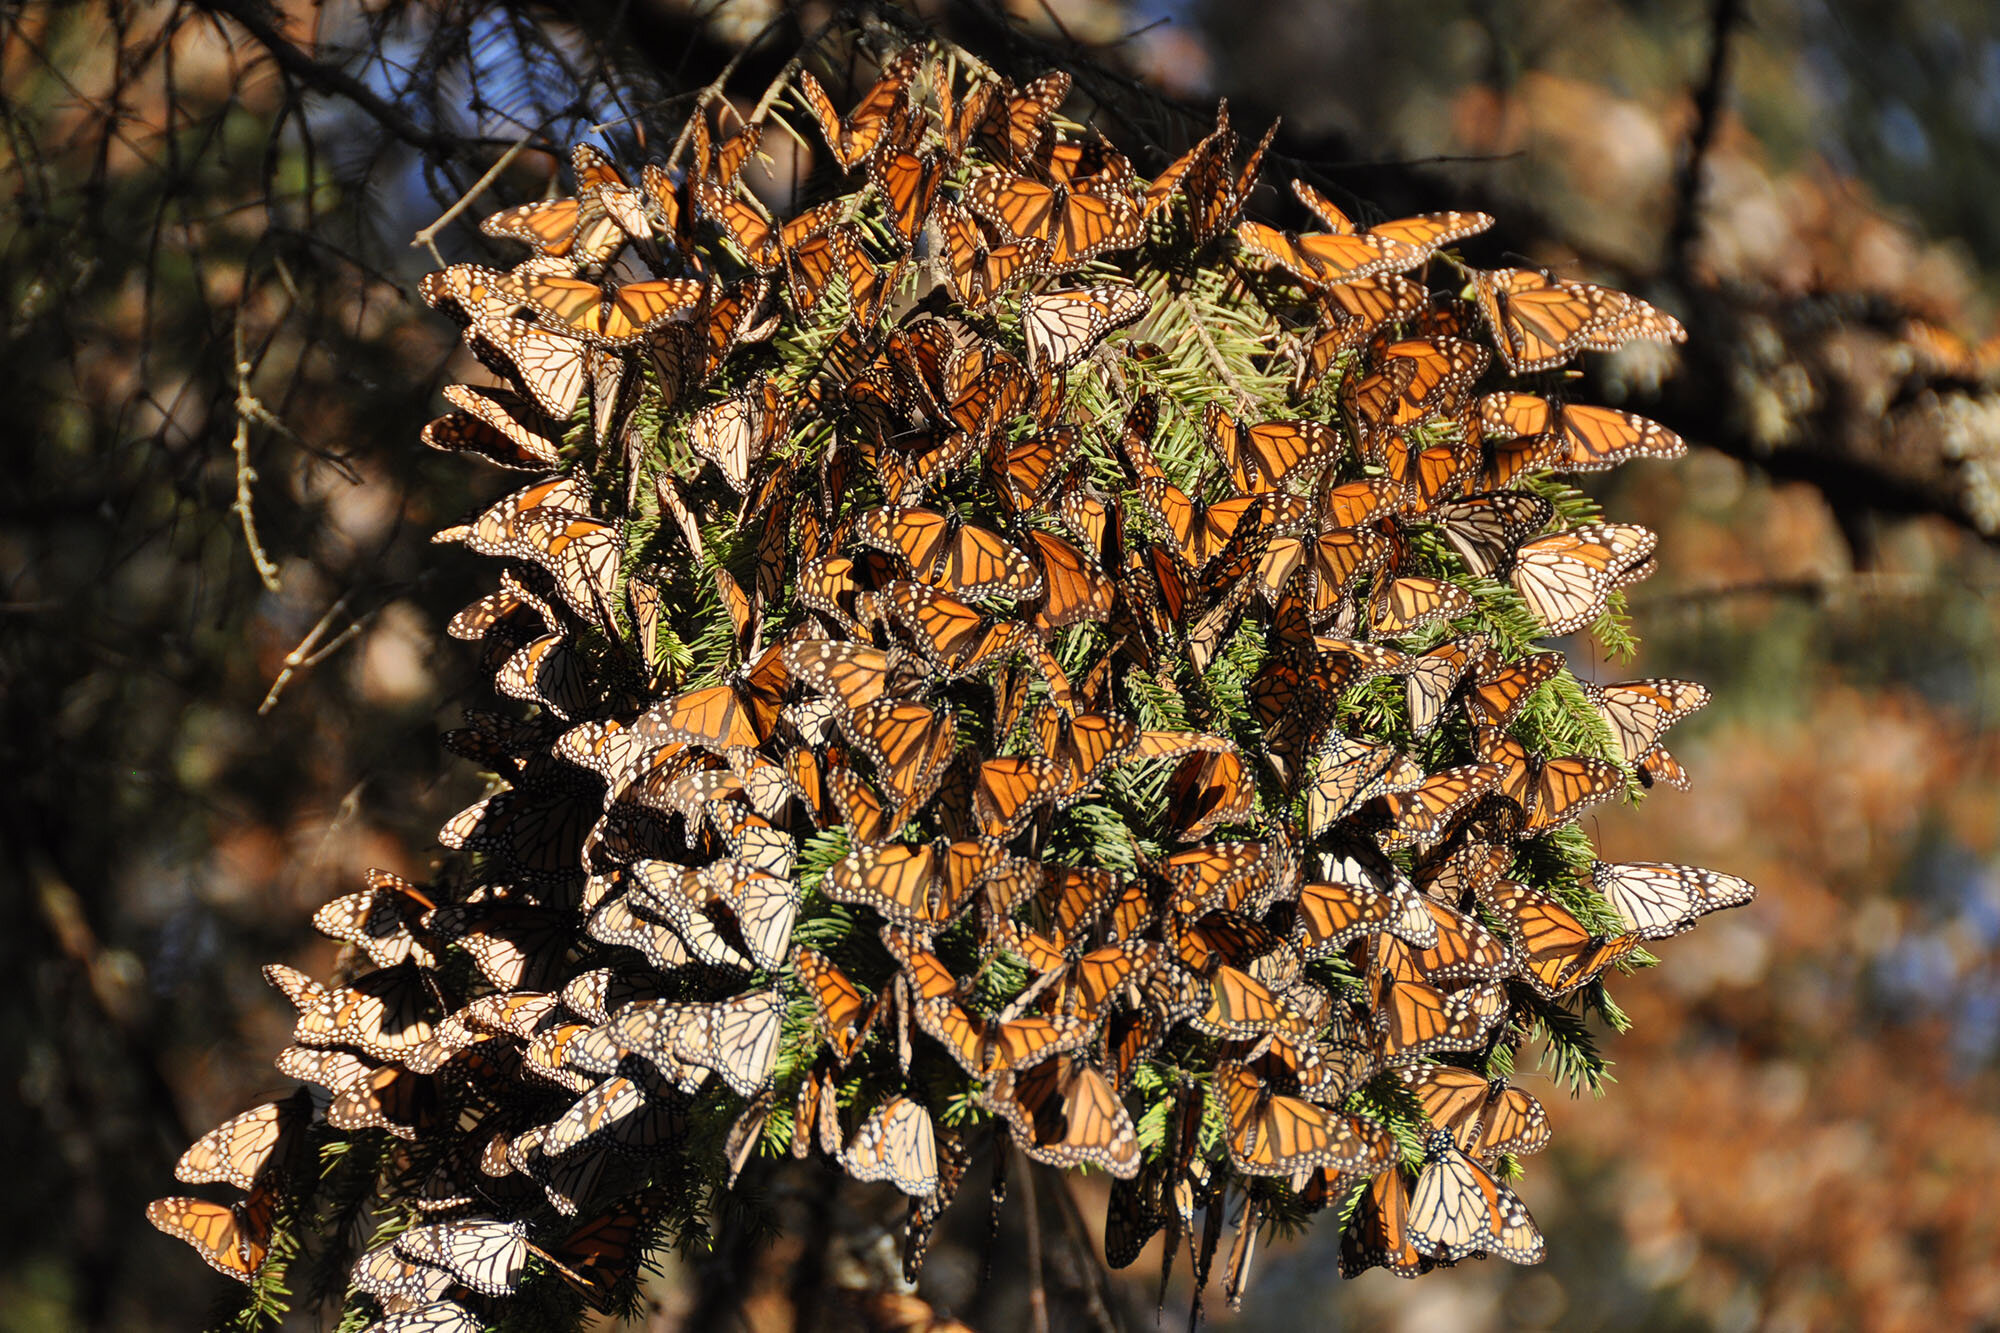 Conservation efforts needed to support monarch butterfly population  recovery